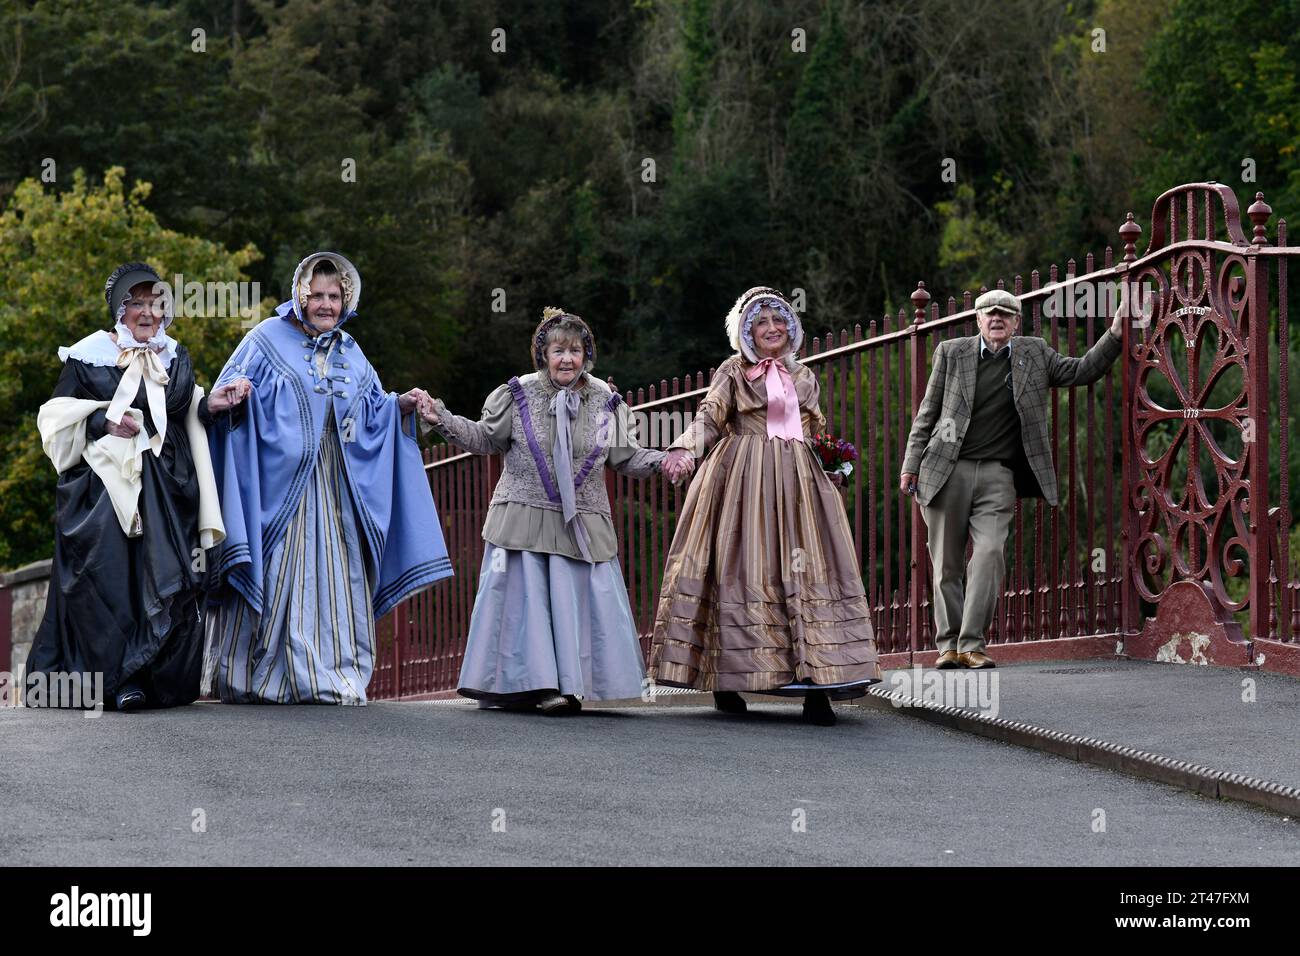 Ladies in Victorian period dress costumes in Ironbridge, Shropshire a Unesco World Heritage Site, England, Uk. Campaigning for fountain restoration . Stock Photo